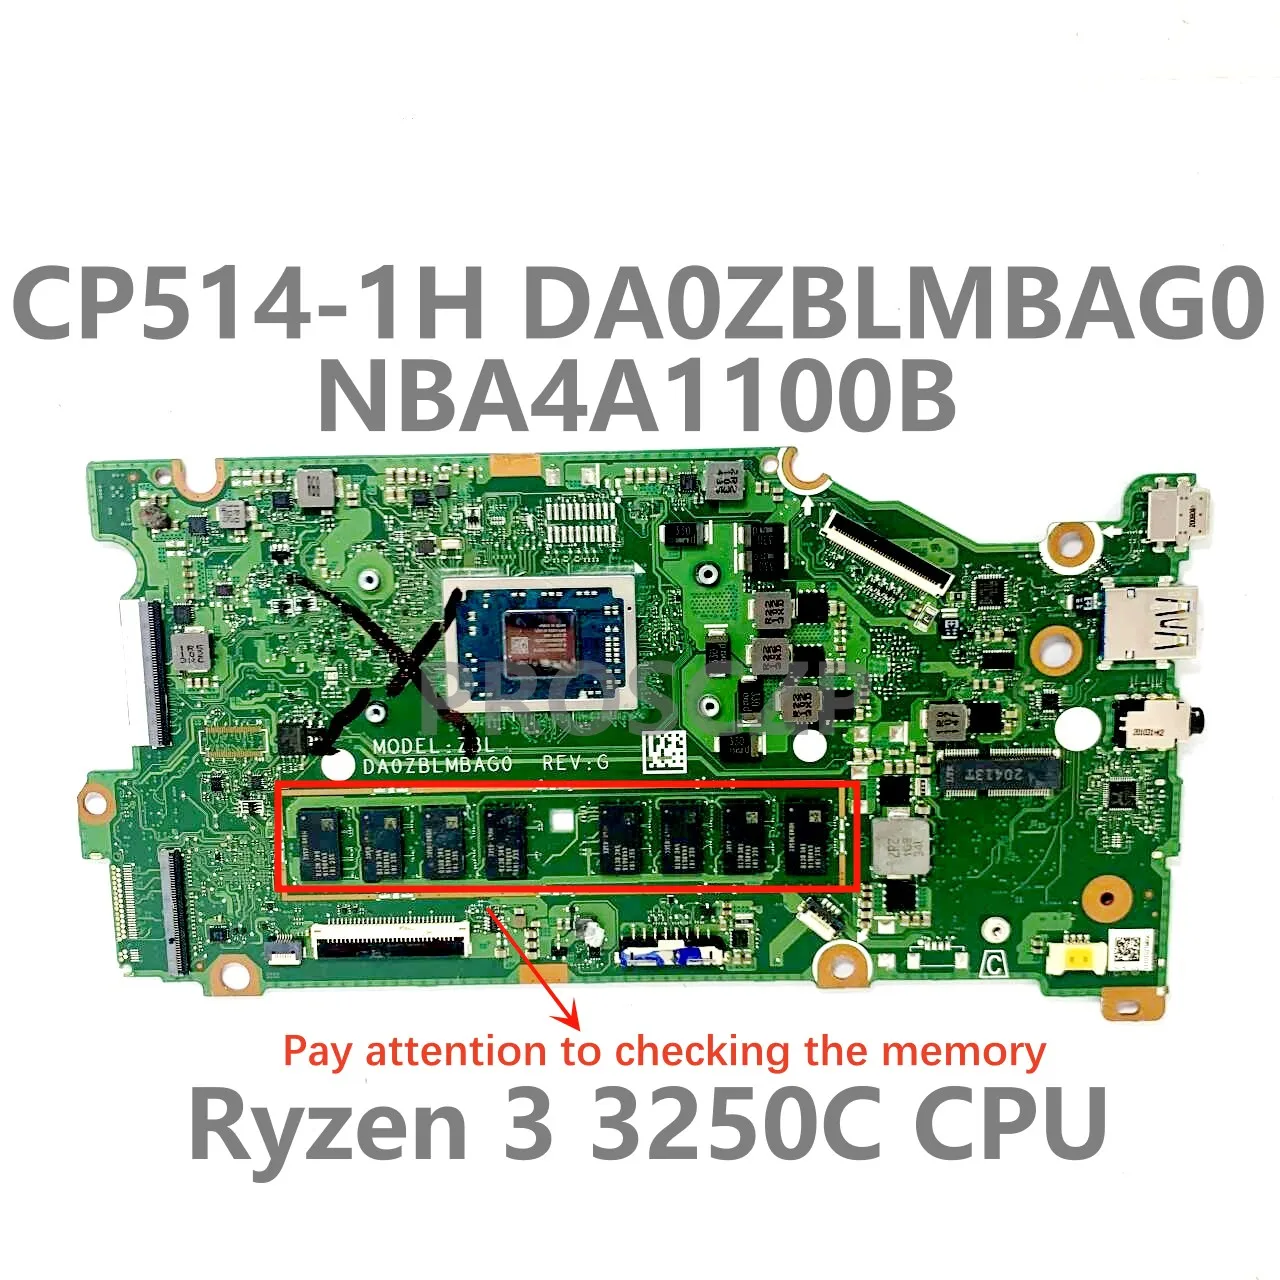 

For Acer Chromebook CP514-1H Laptop Motherboard NBA4A1100B DA0ZBLMBAG0 Mainboard With Ryzen 3 3250C CPU 100% Tested Working Well